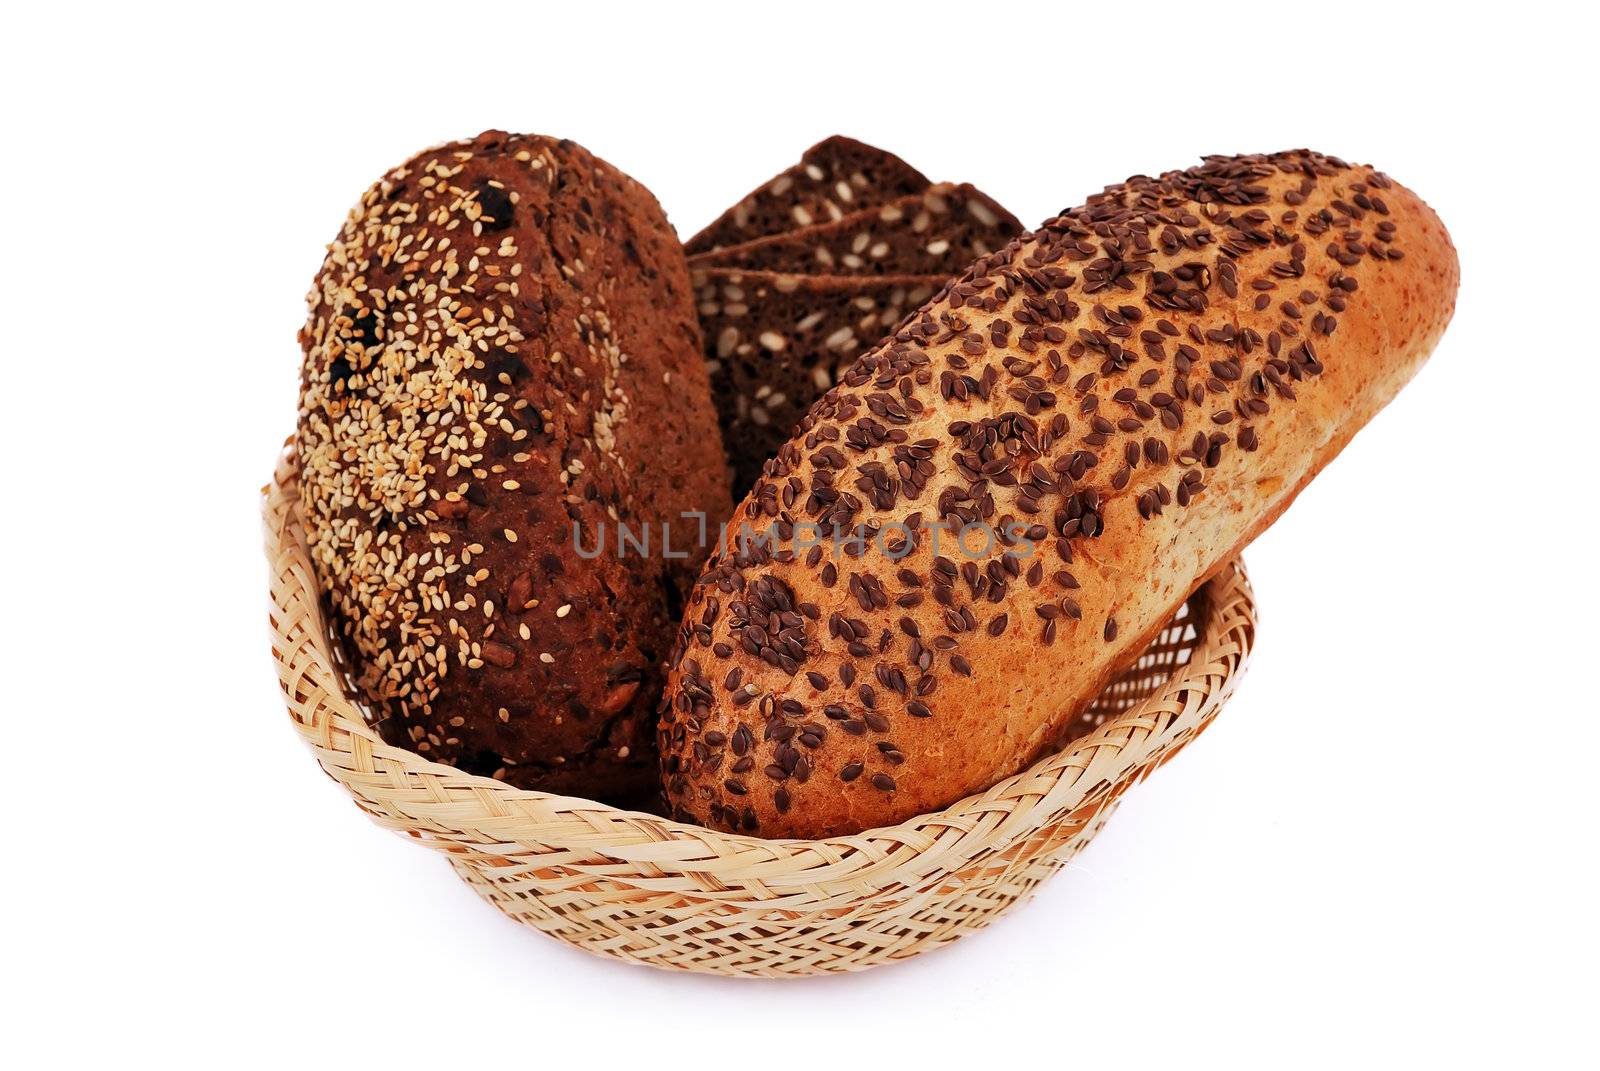 bread with sesame seeds in a wooden basket